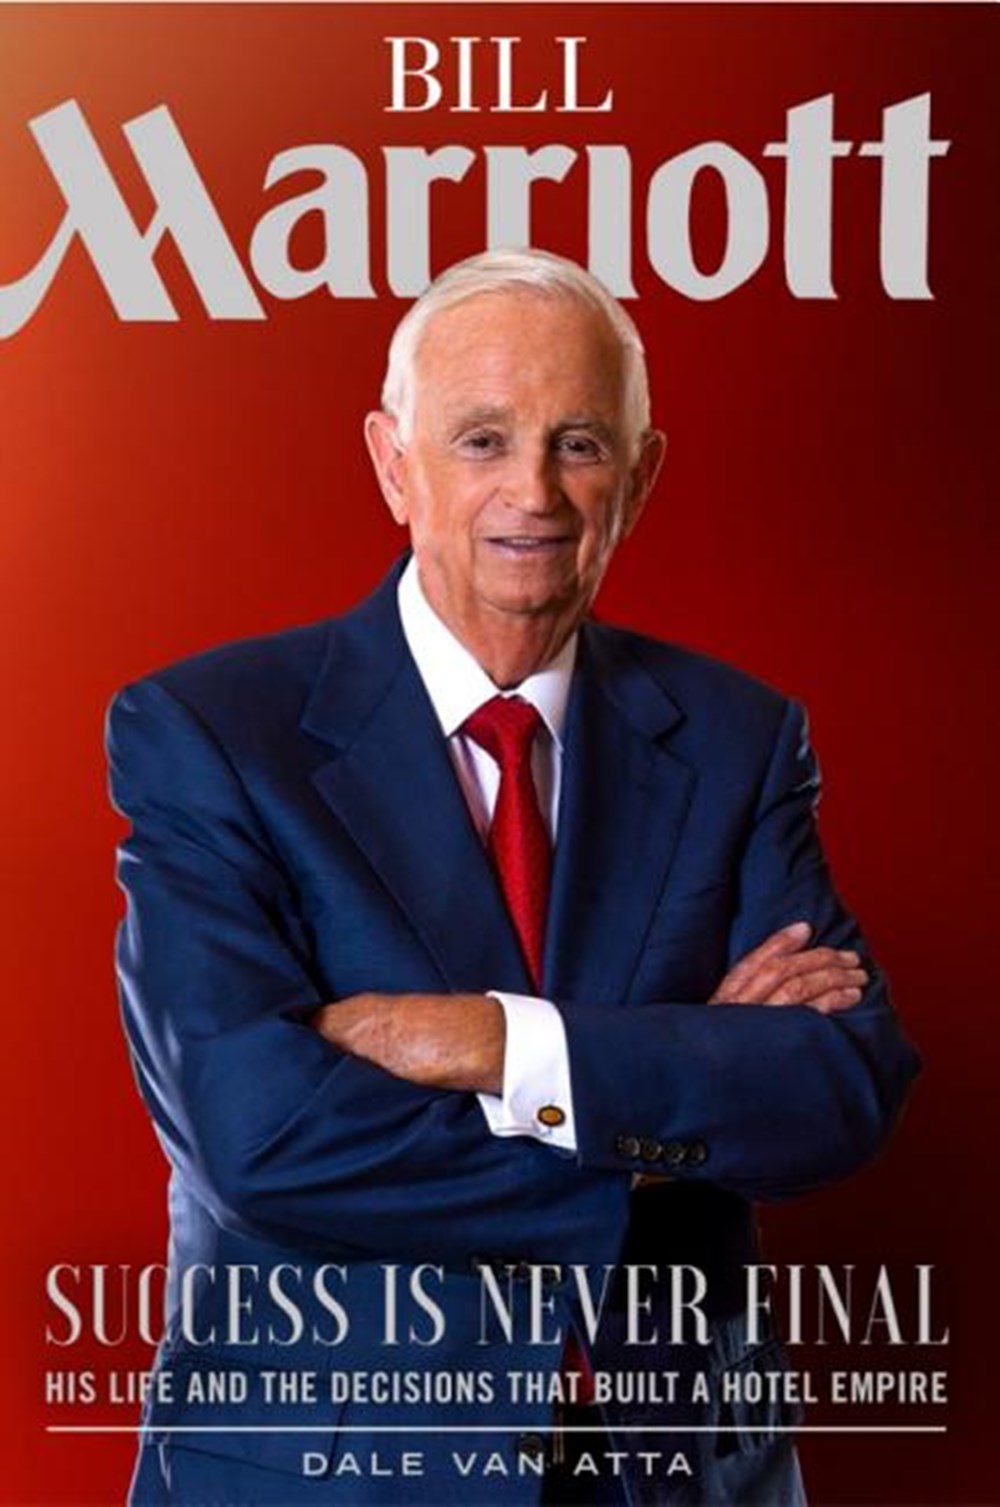 Bill Marriott Success Is Never Final--His Life and the Decisions That Built a Hotel Empire